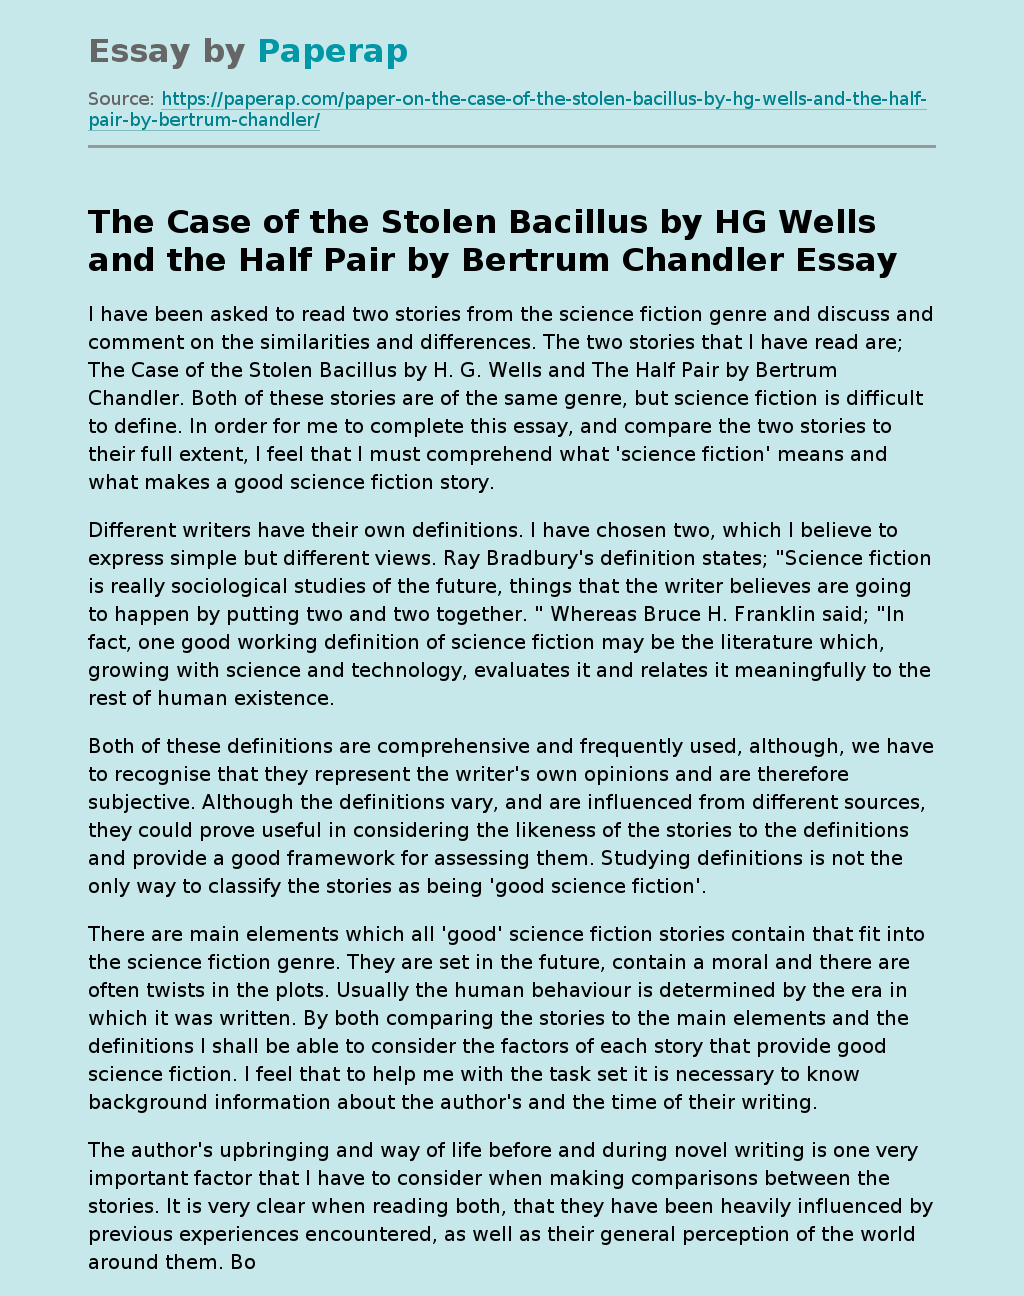 The Case of the Stolen Bacillus by HG Wells and the Half Pair by Bertrum Chandler